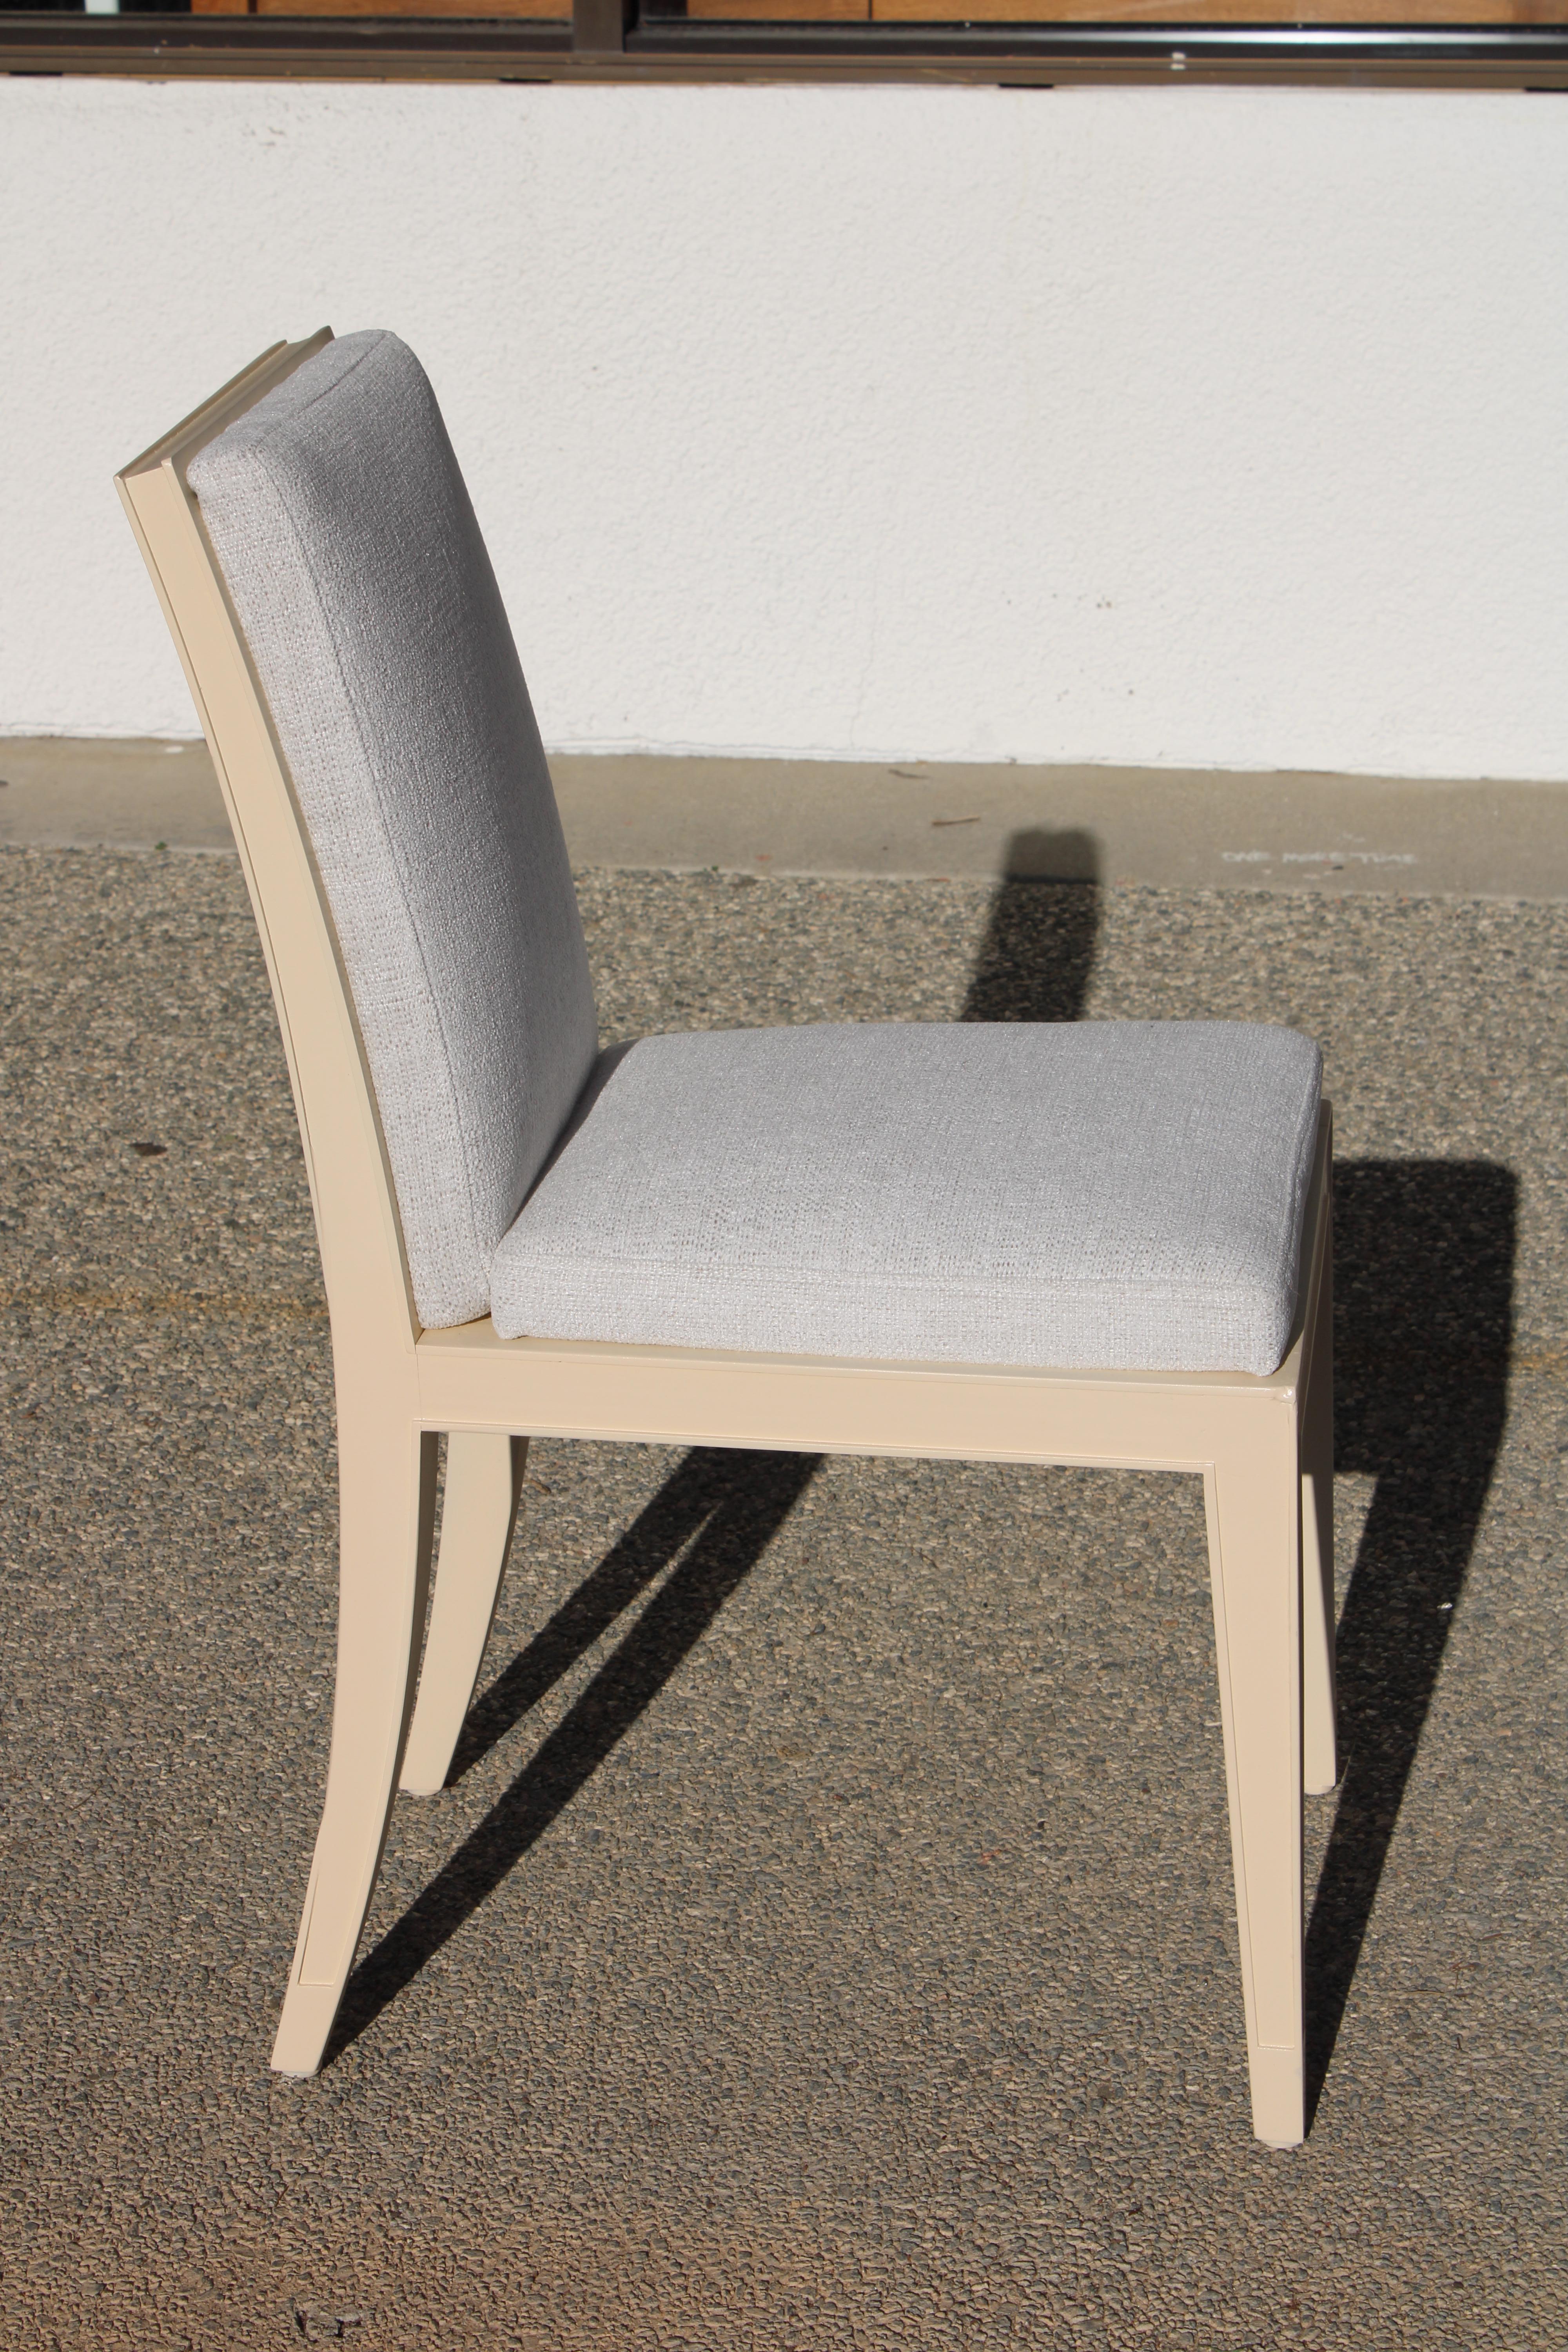 Six Petite Chairs by Philippe Starck for the Clift Hotel, San Francisco In Good Condition For Sale In Palm Springs, CA